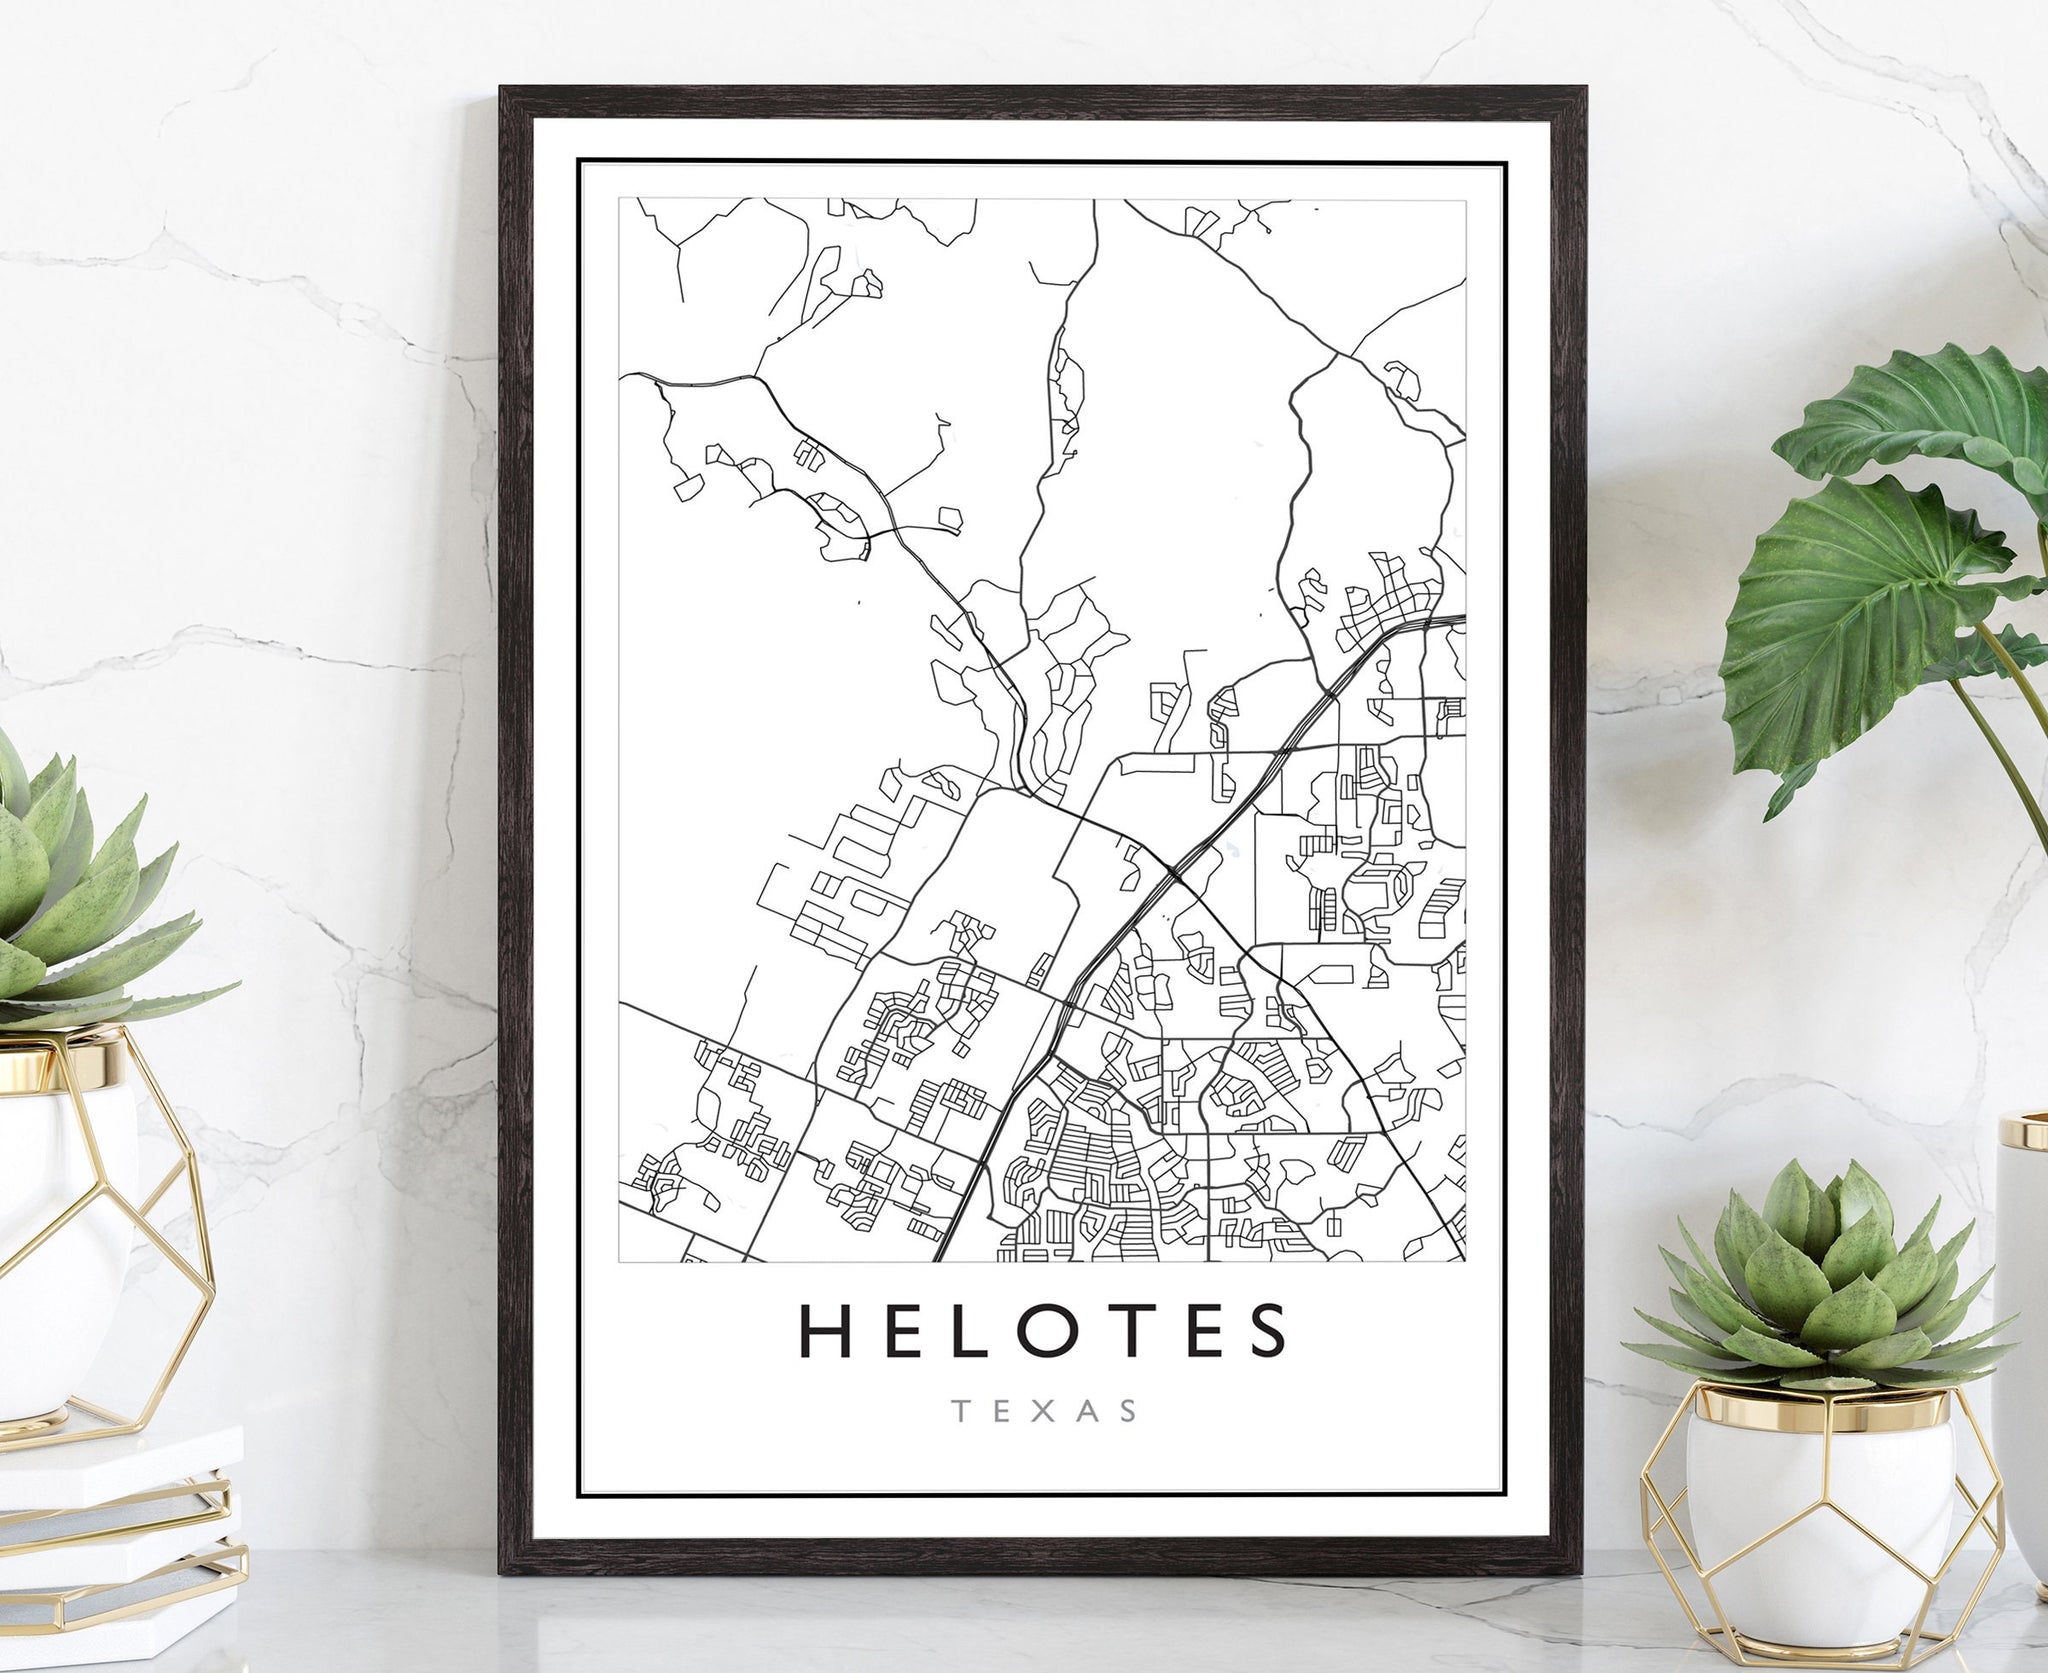 Helotes Texas City Map, Helotes Texas City Road Map Poster, City Street Map Print, US City Modern City Map, Home Wall Decor, Office Wall Art